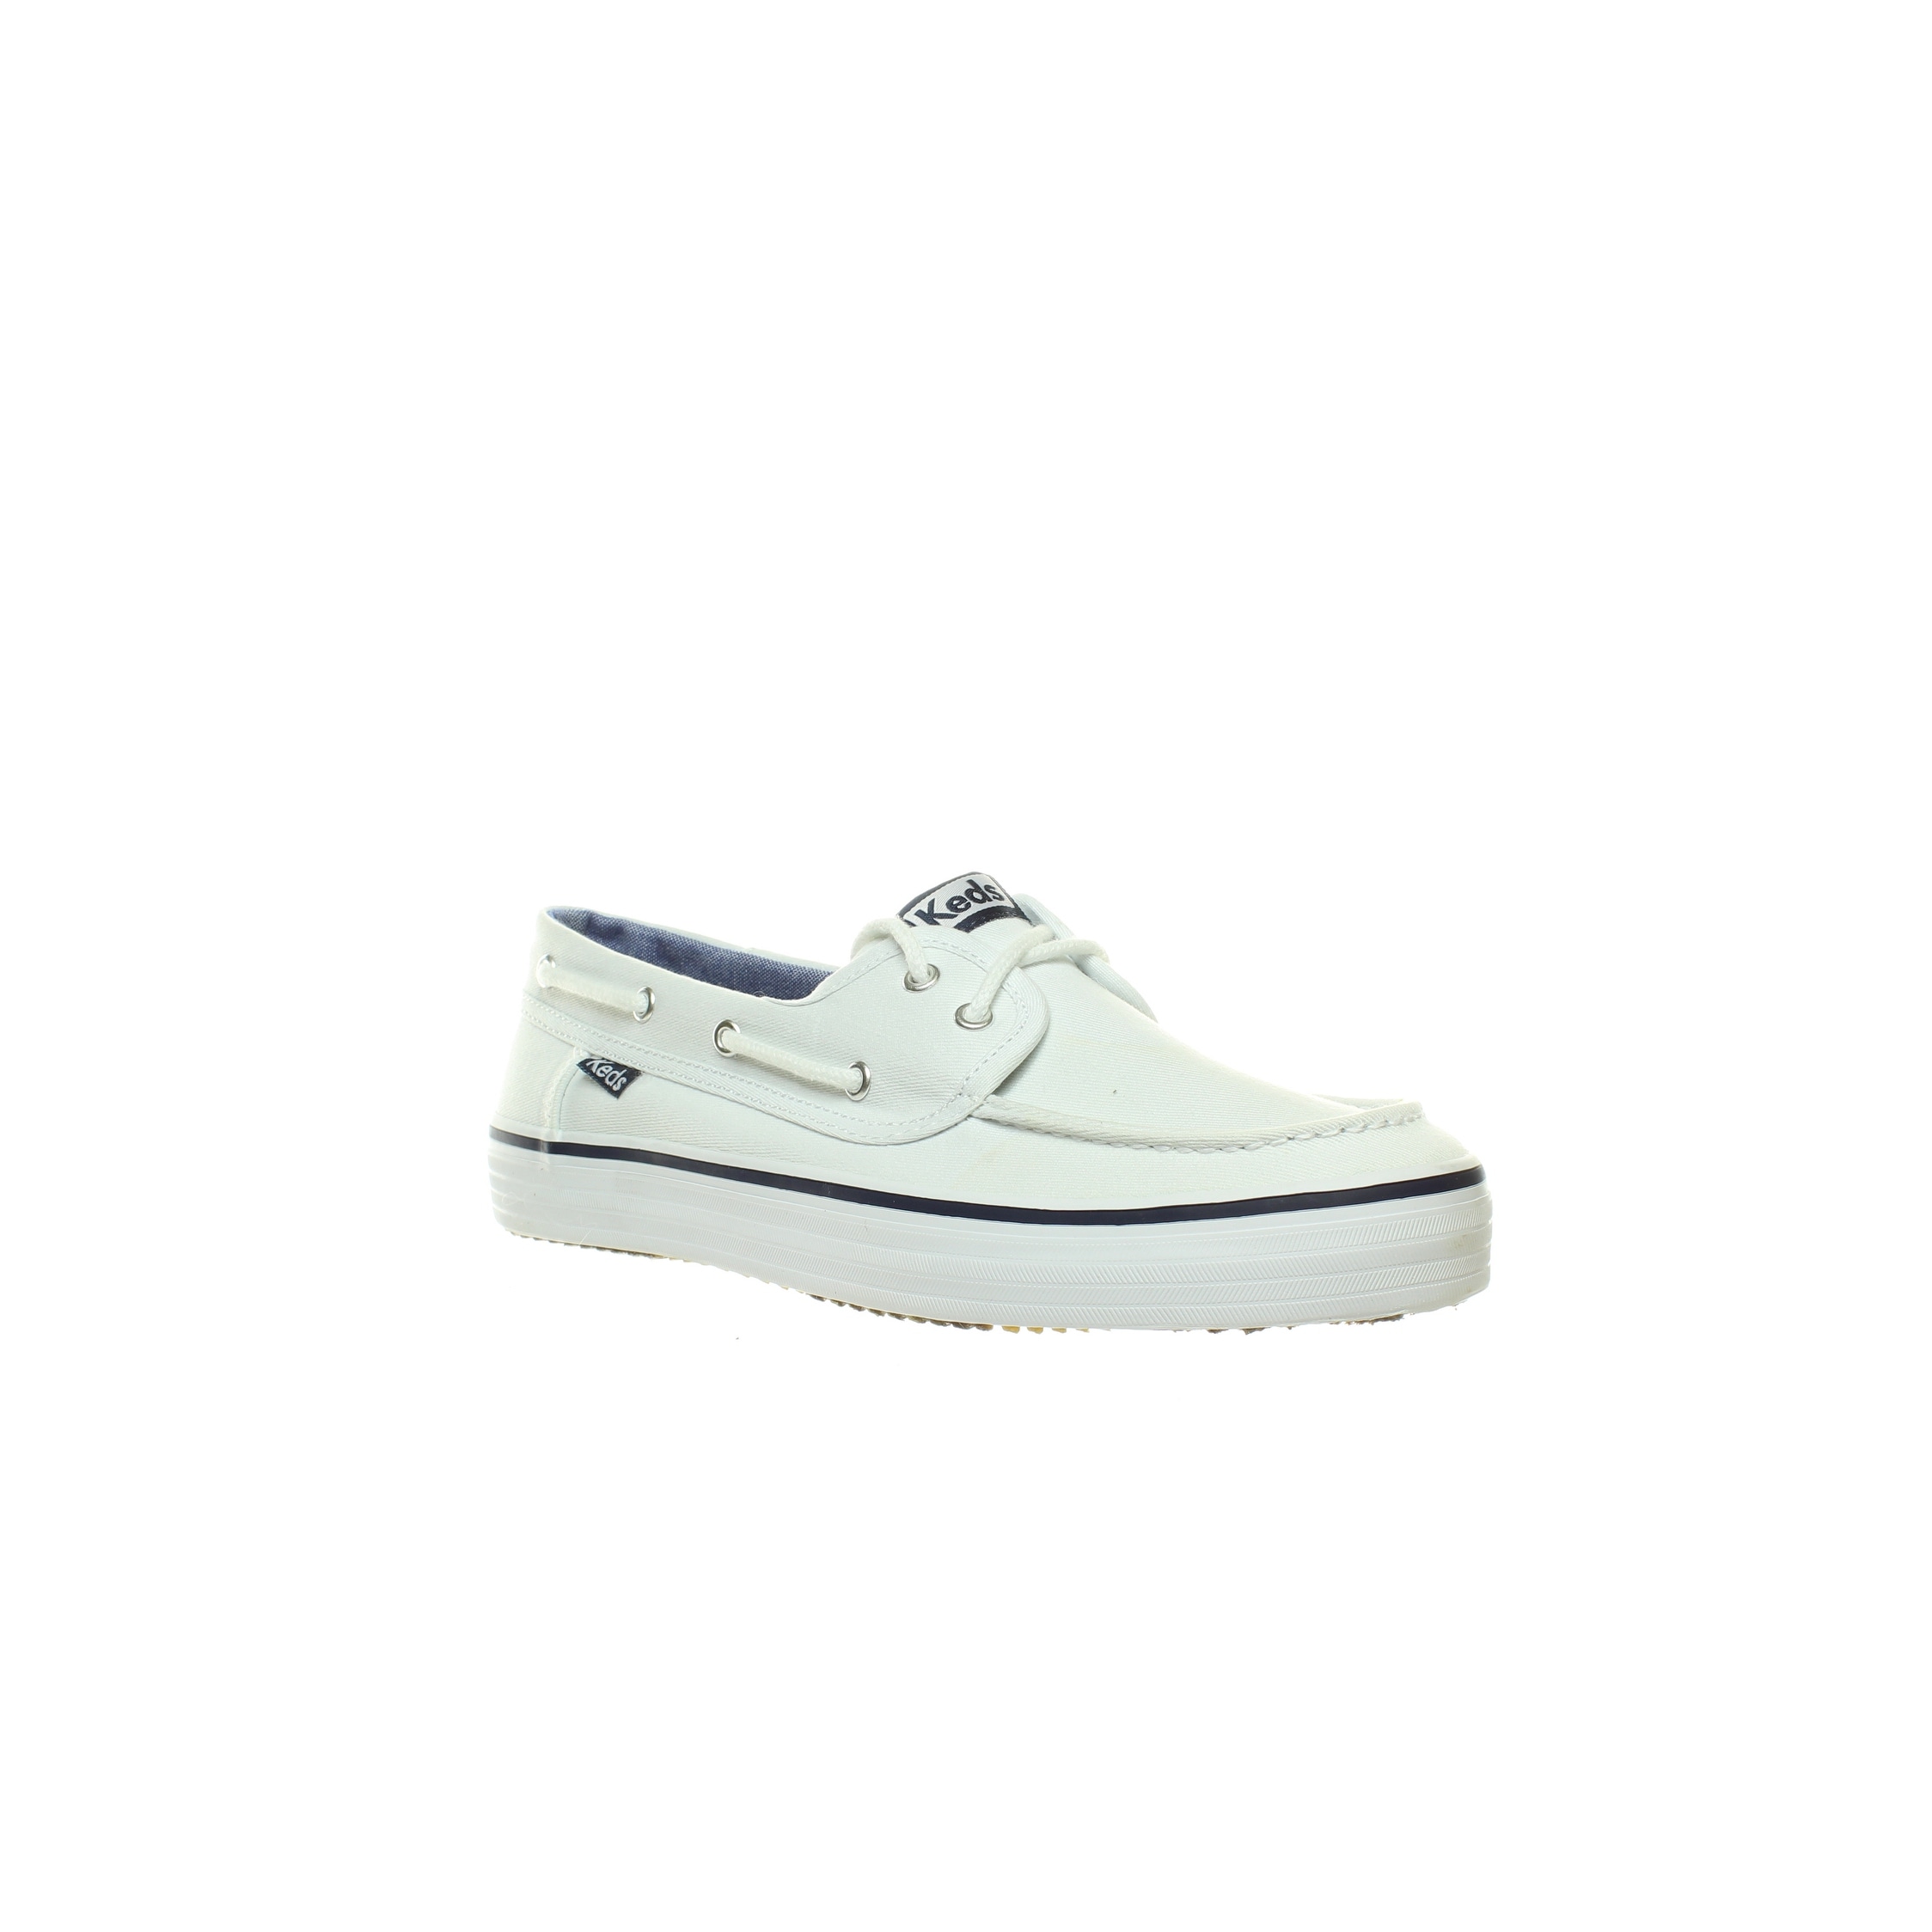 Keds Womens Baybird White Boat Shoes 